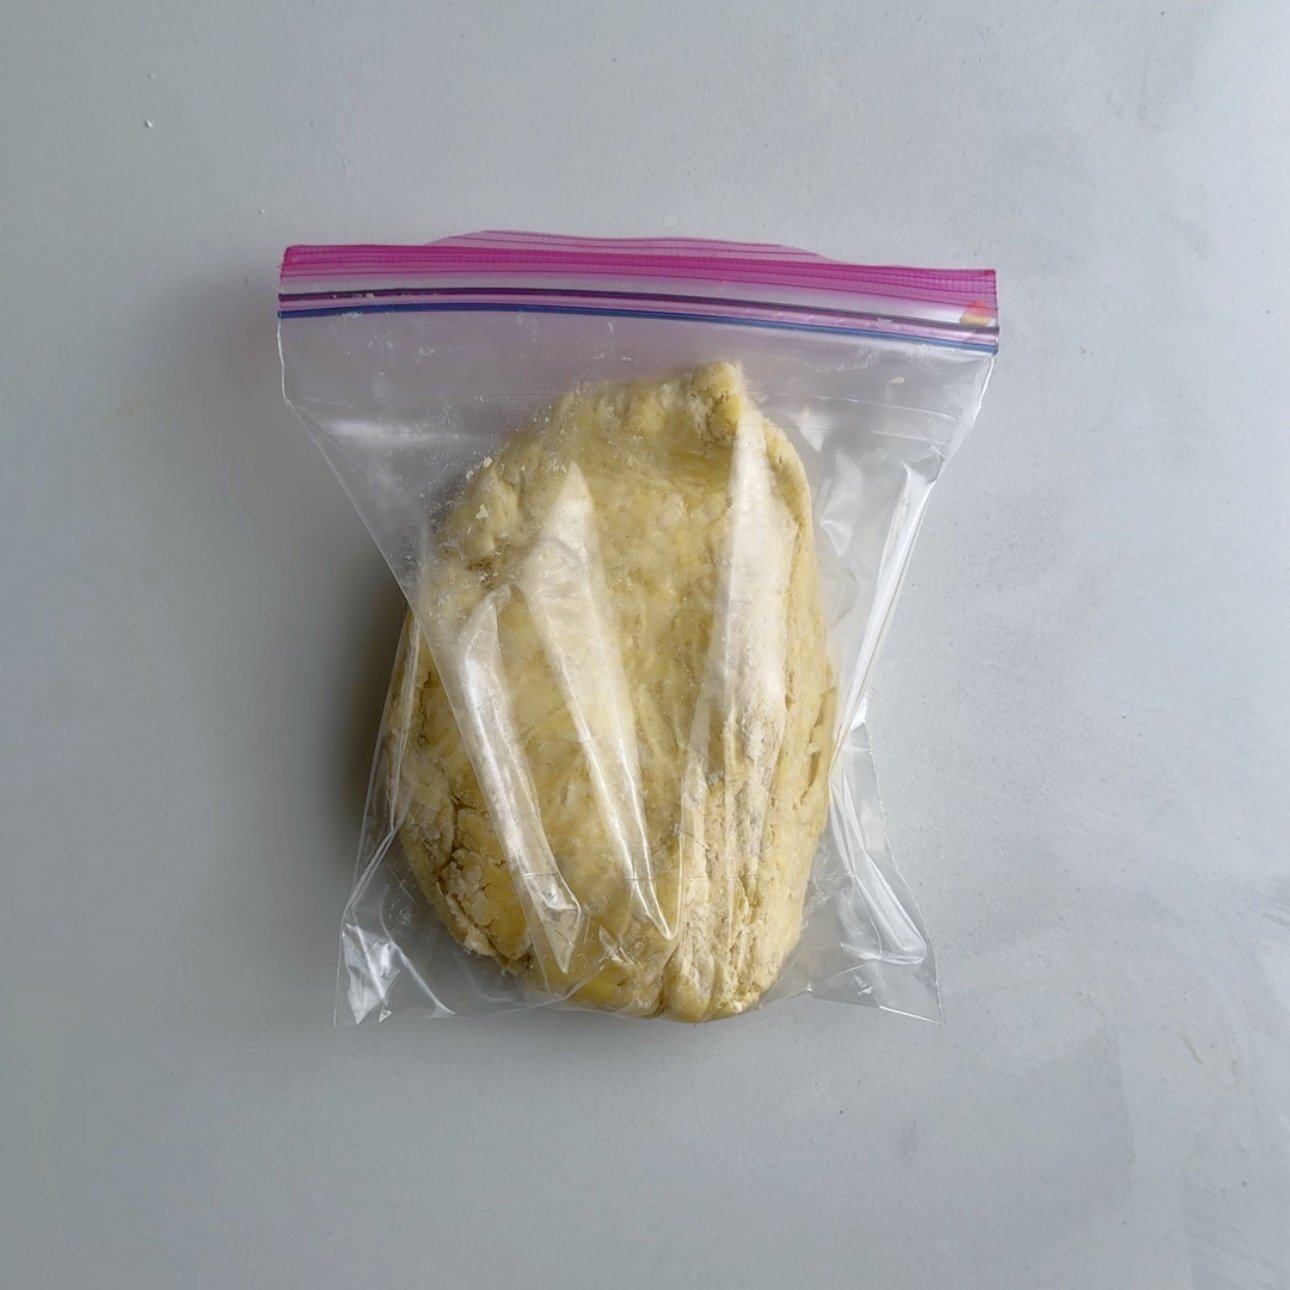 Guyanese pastry dough in a quart size ziplock plastic bag on a white surface